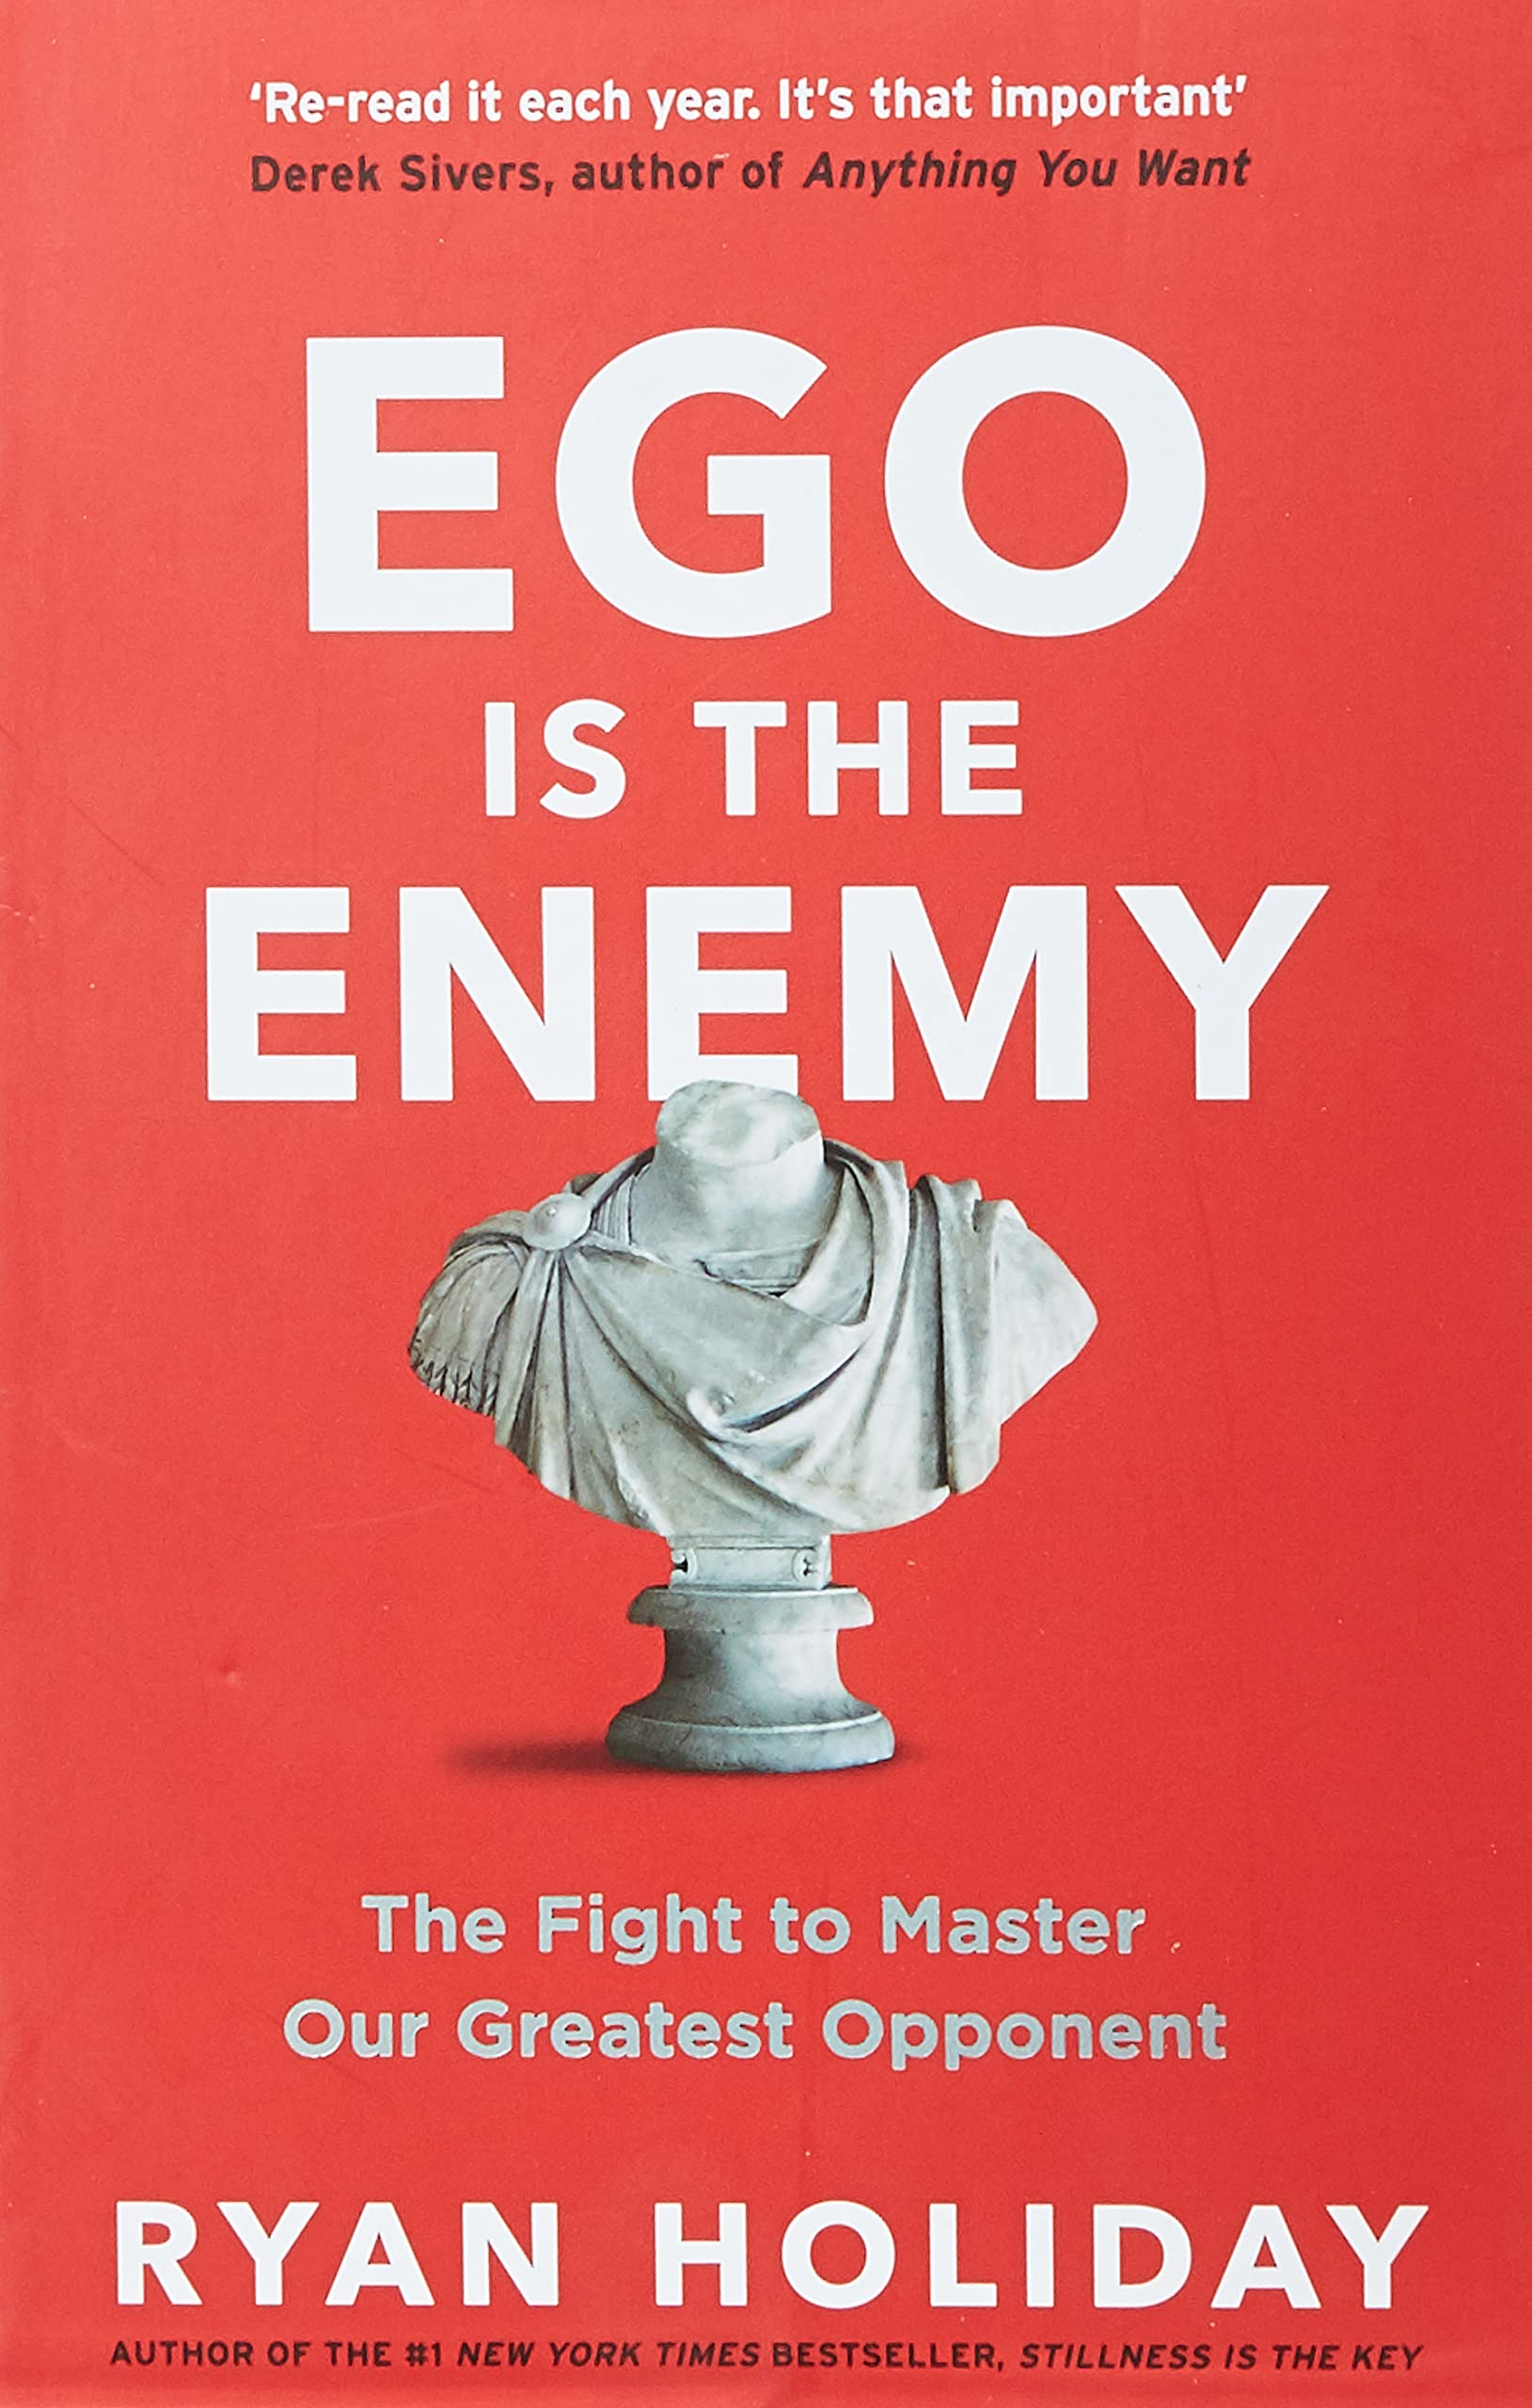 Ego is the Enemy – Reverse Engineering a Vision that was not there